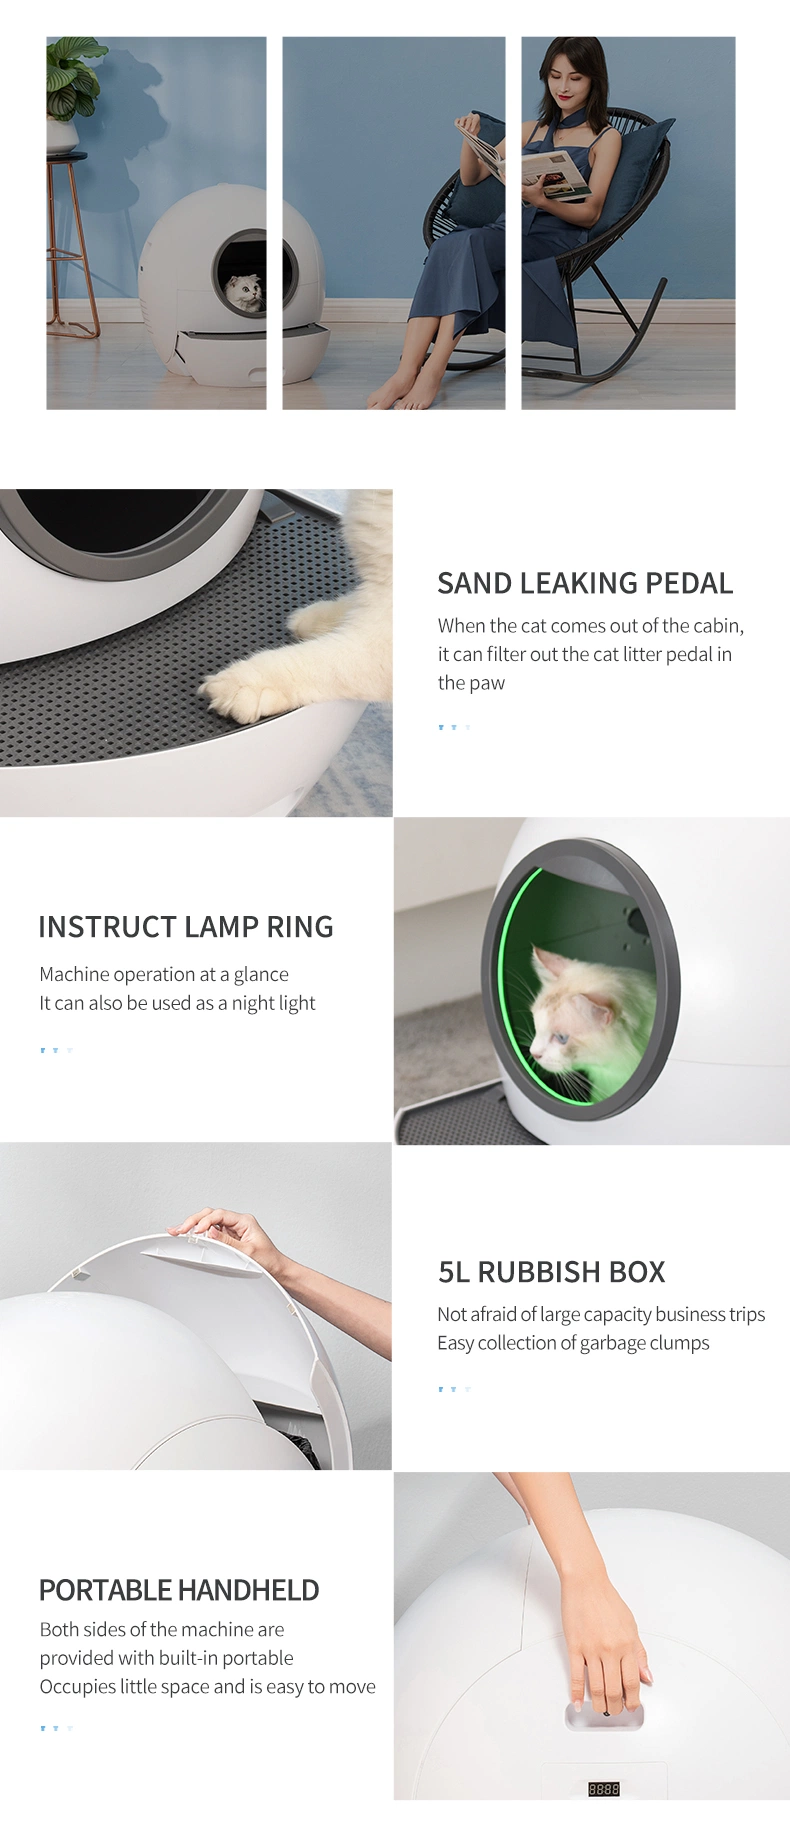 Extra Large Smart Cat Toilet APP Control Self-Cleaning Cat Toilet Automatic Cat Toilet for Multiple Cats